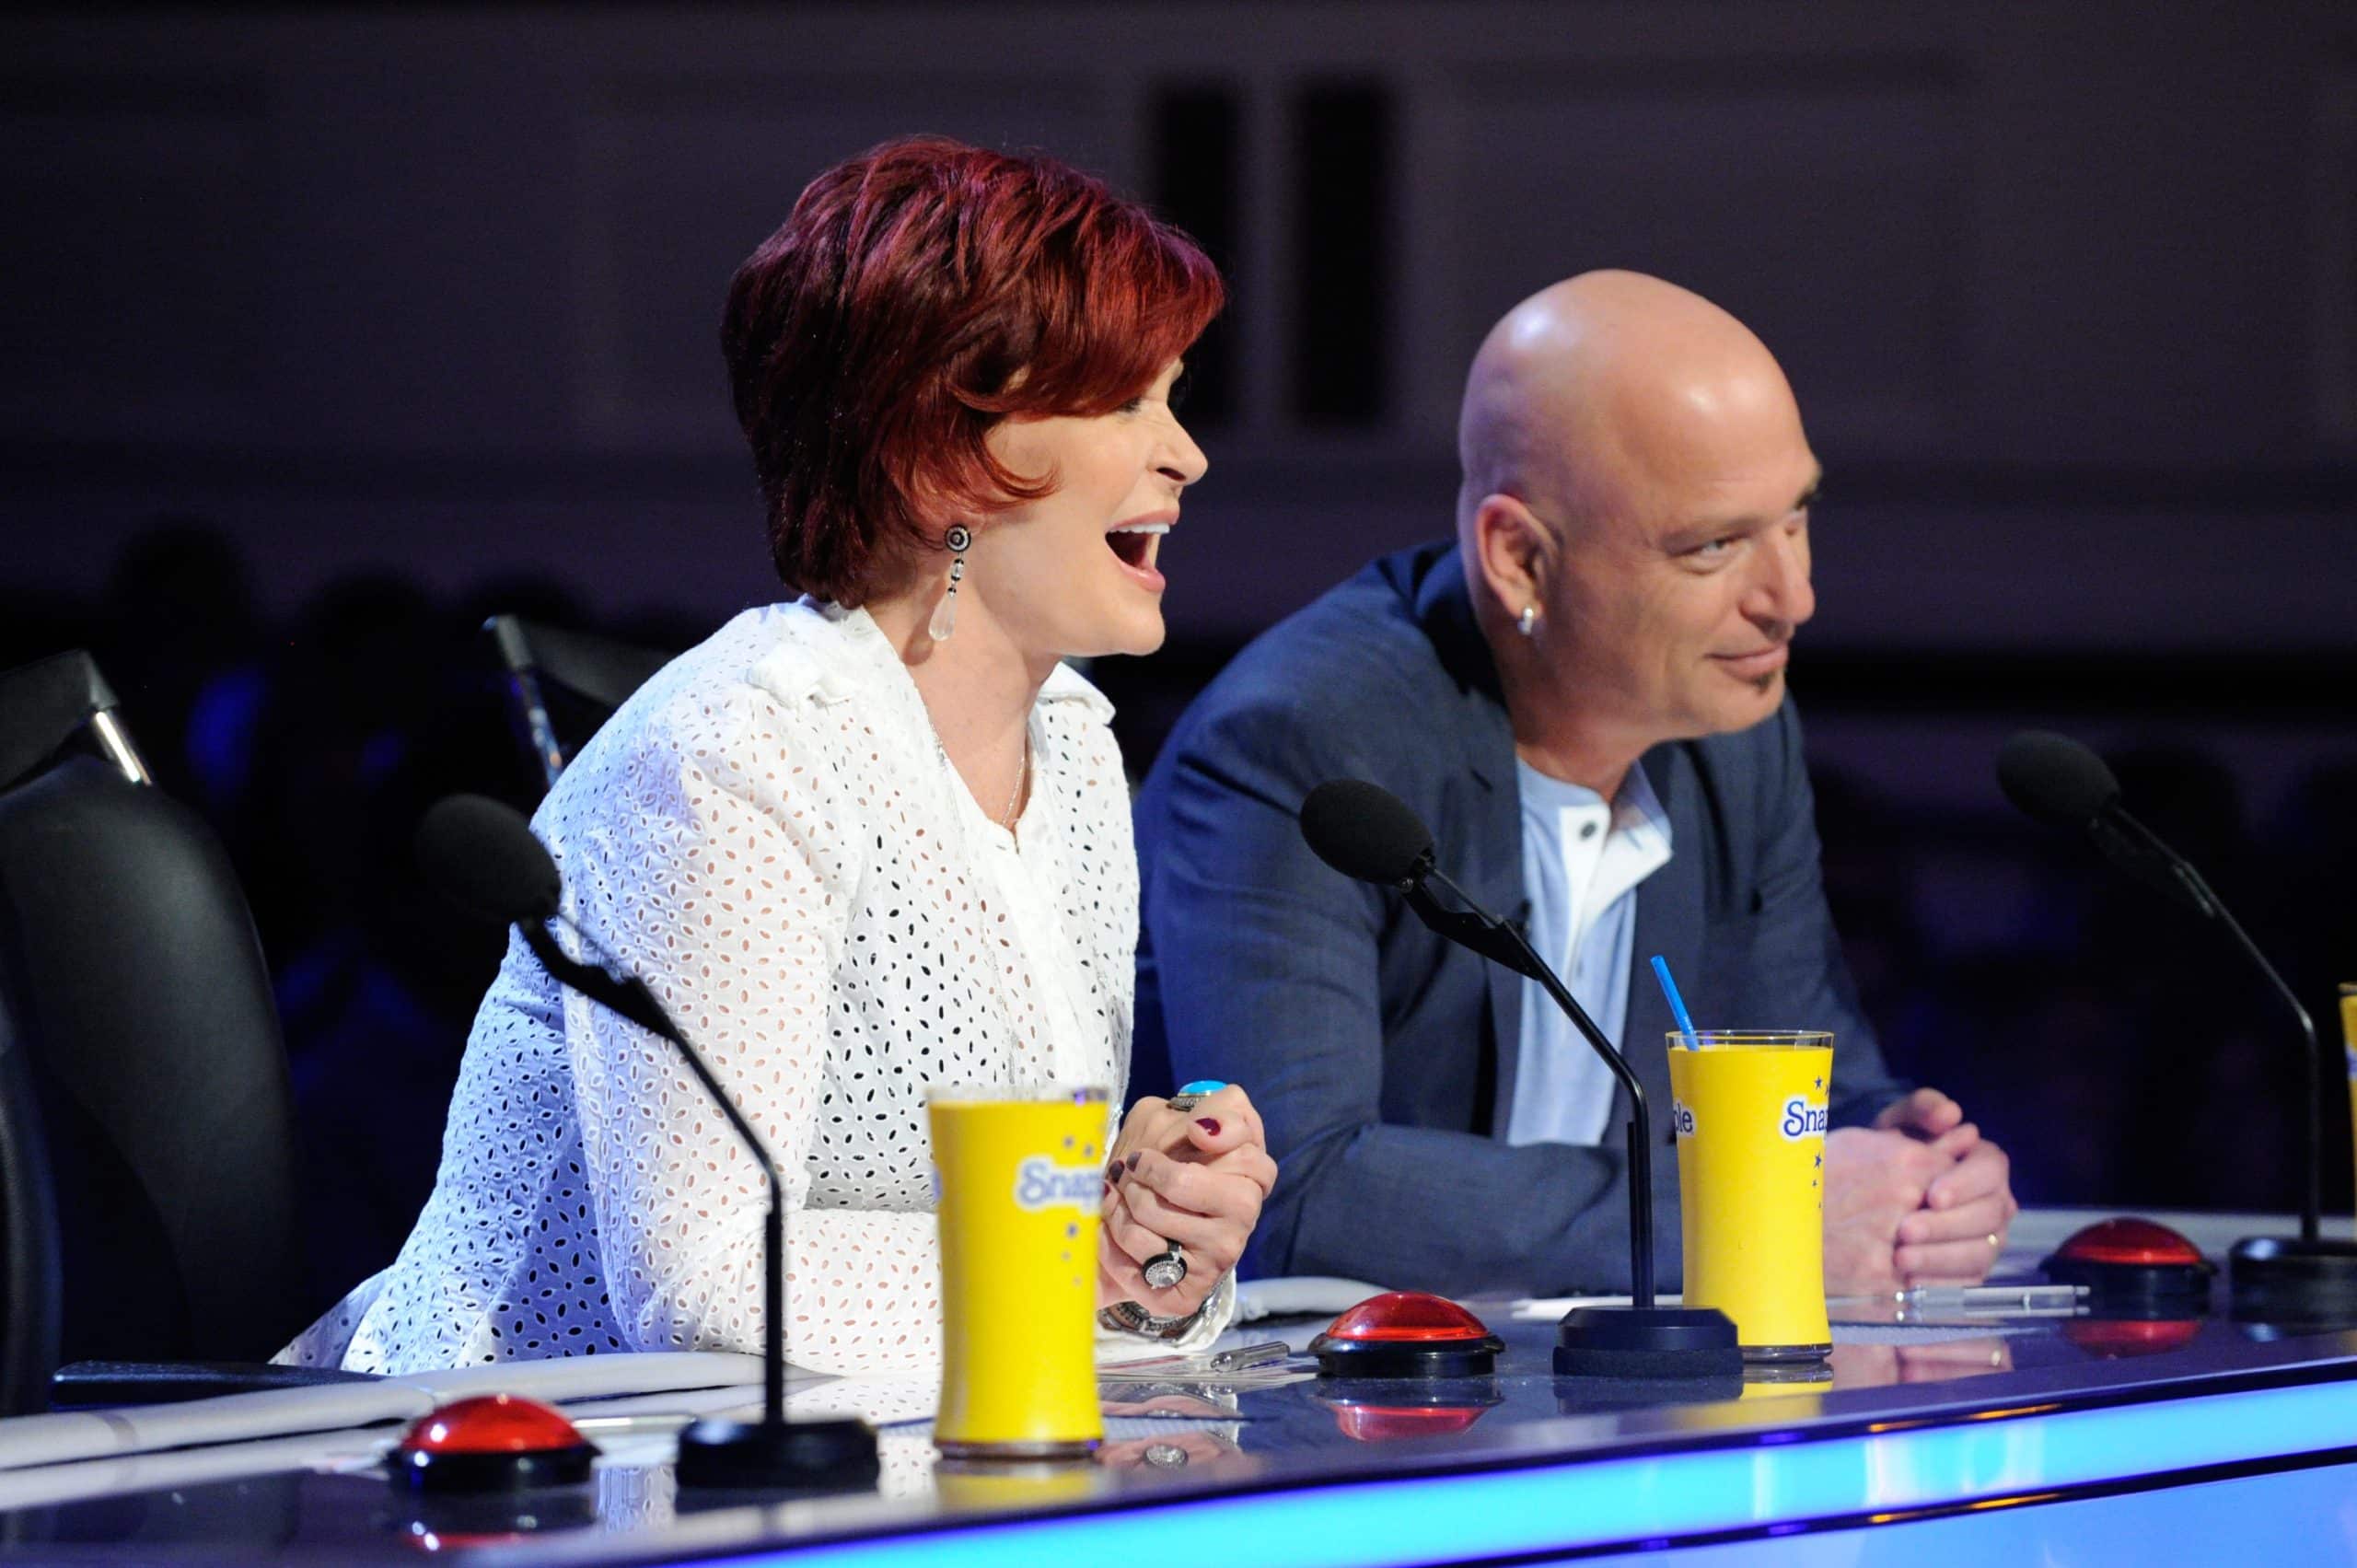 AMERICA'S GOT TALENT, (from left): judge Sharon Osbourne, Howie Mandel, 'Auditions Tampa Mahaffey Theater', (Season 7, aired May 28, 2012), 2006-